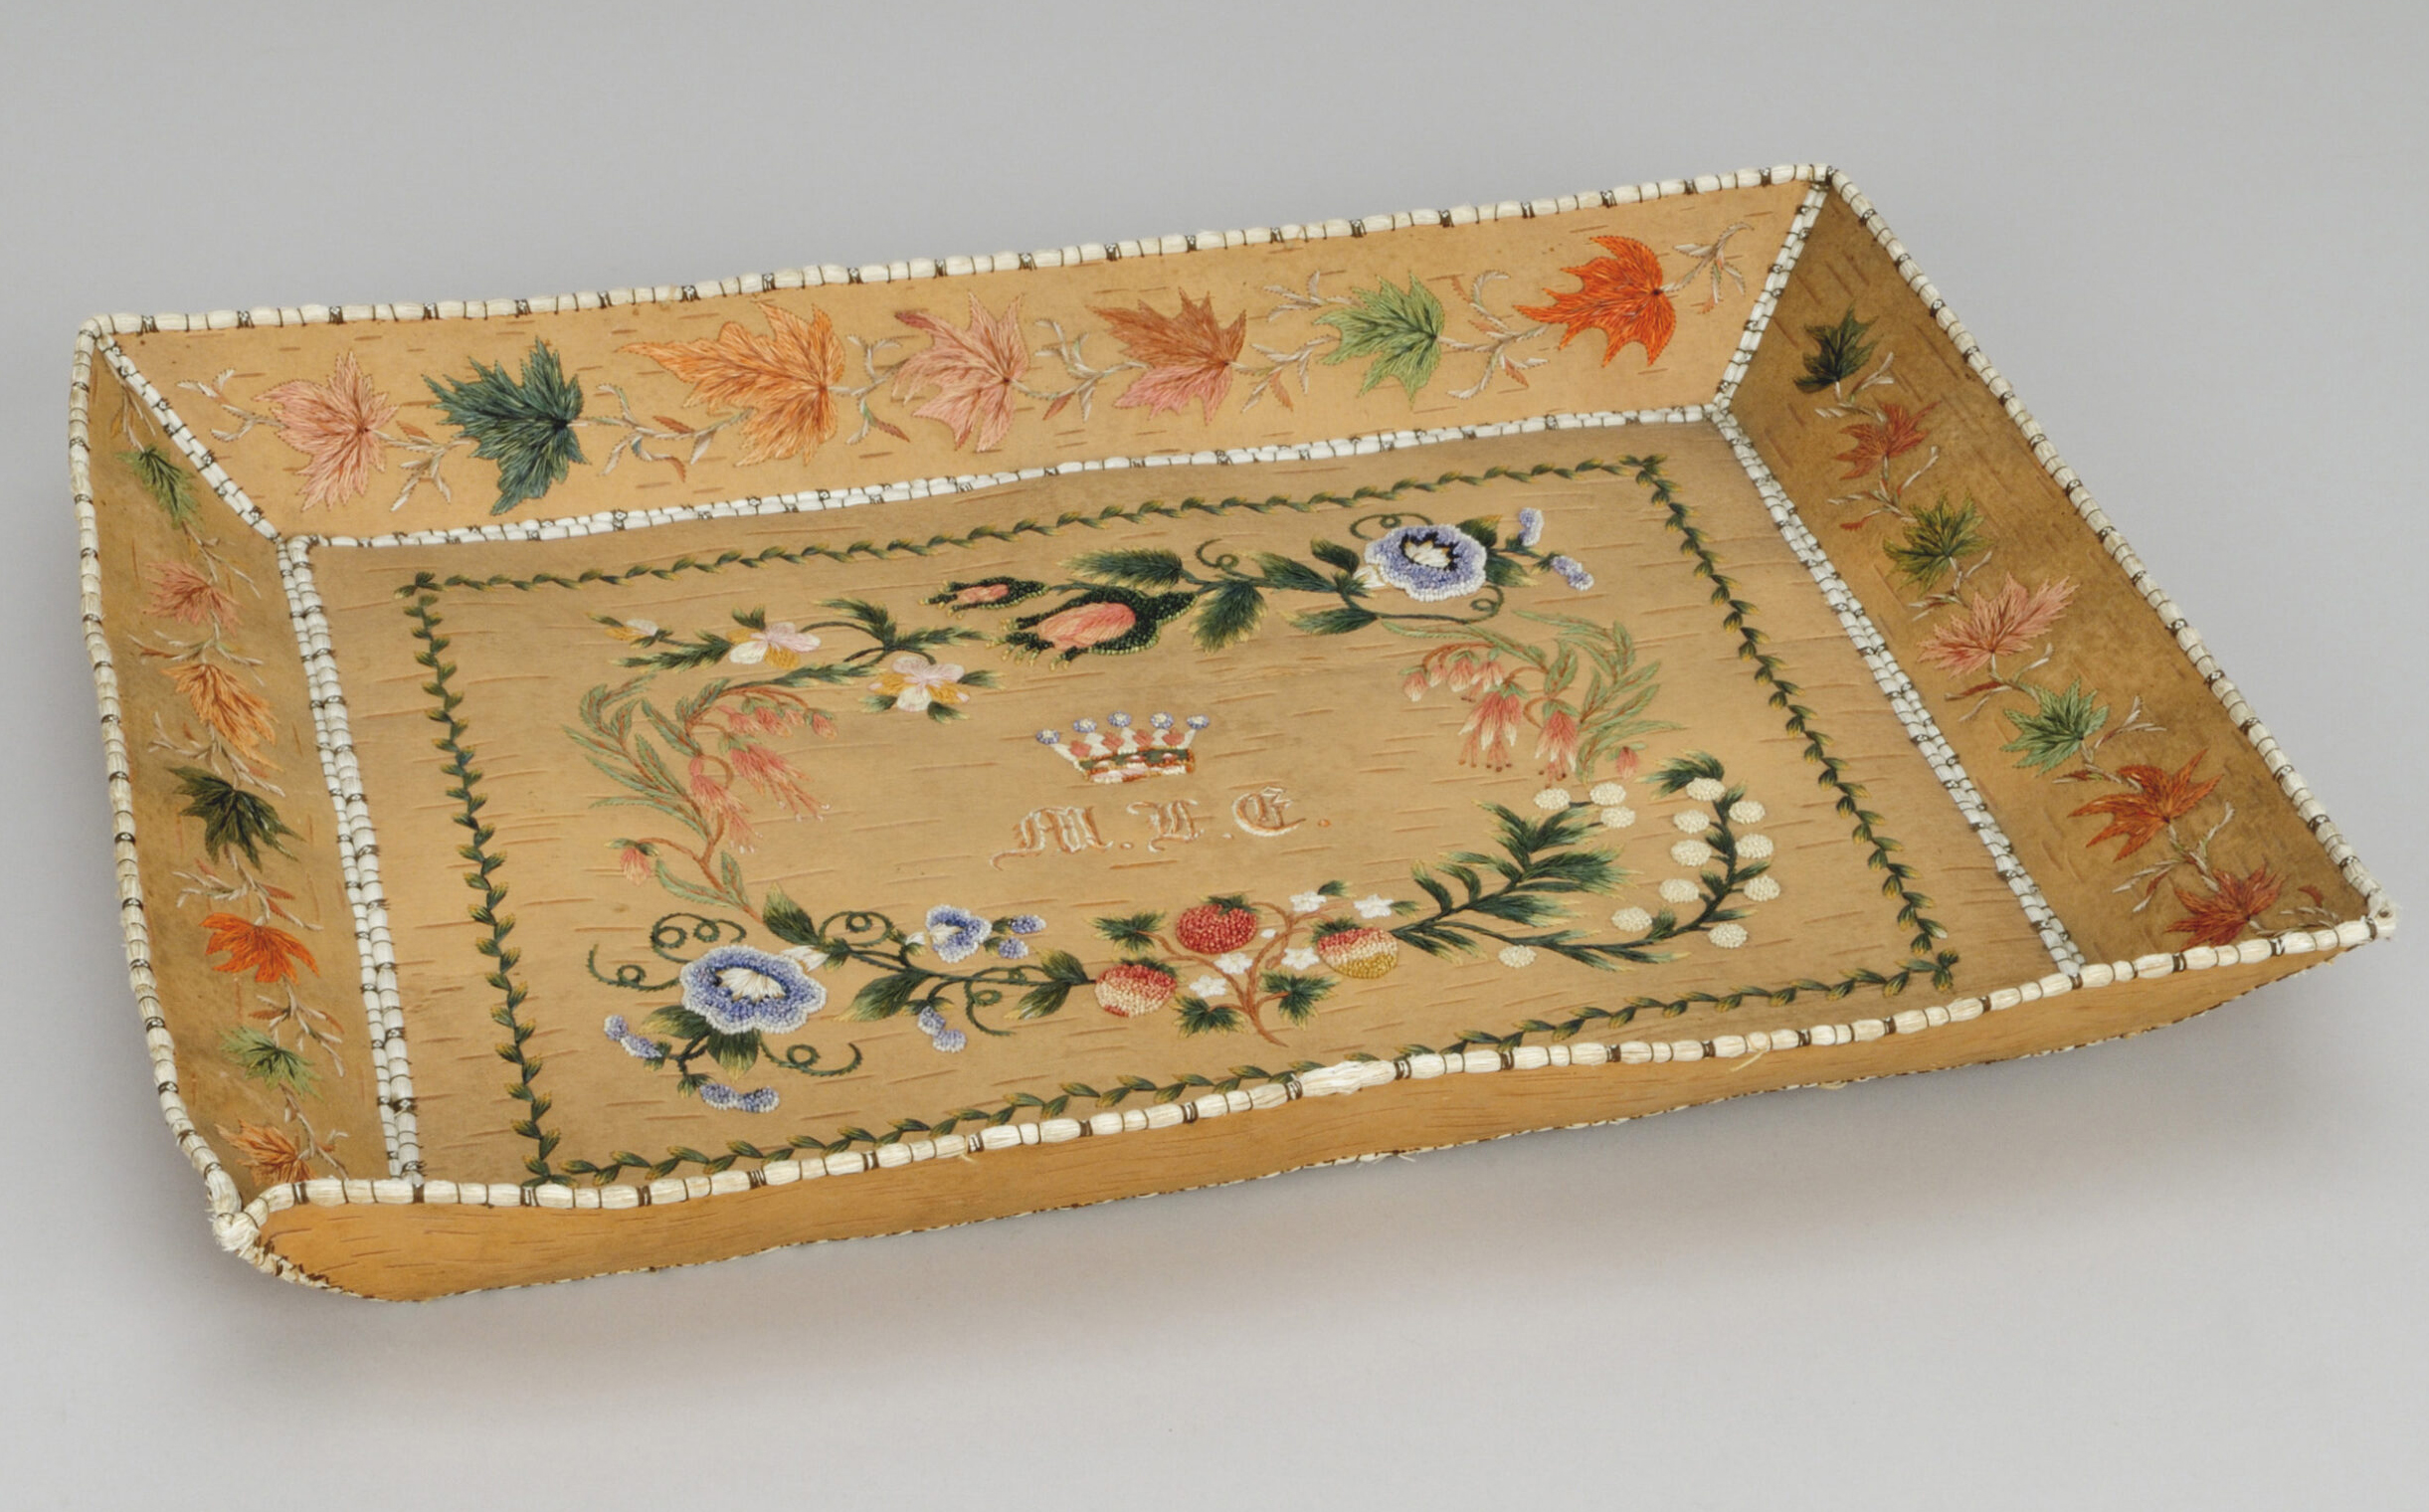 Embroidered diplomacy, the Elgin Trays